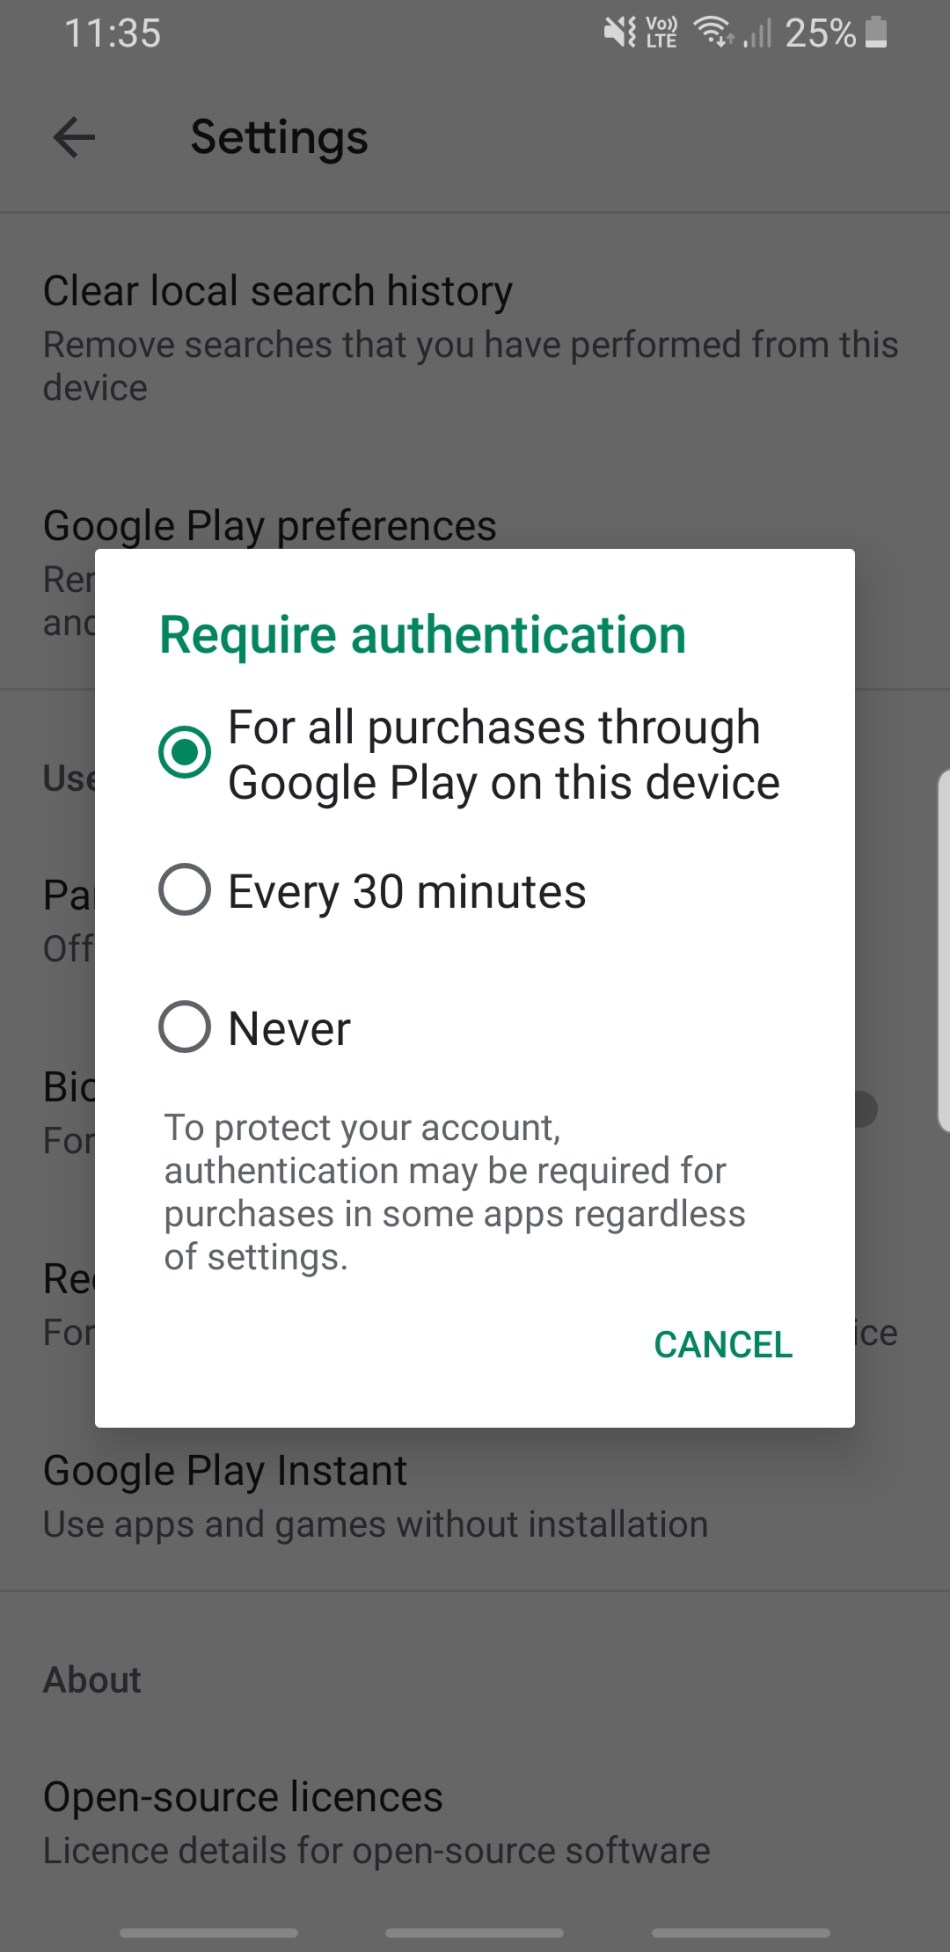 removes digital content purchases from its Android app